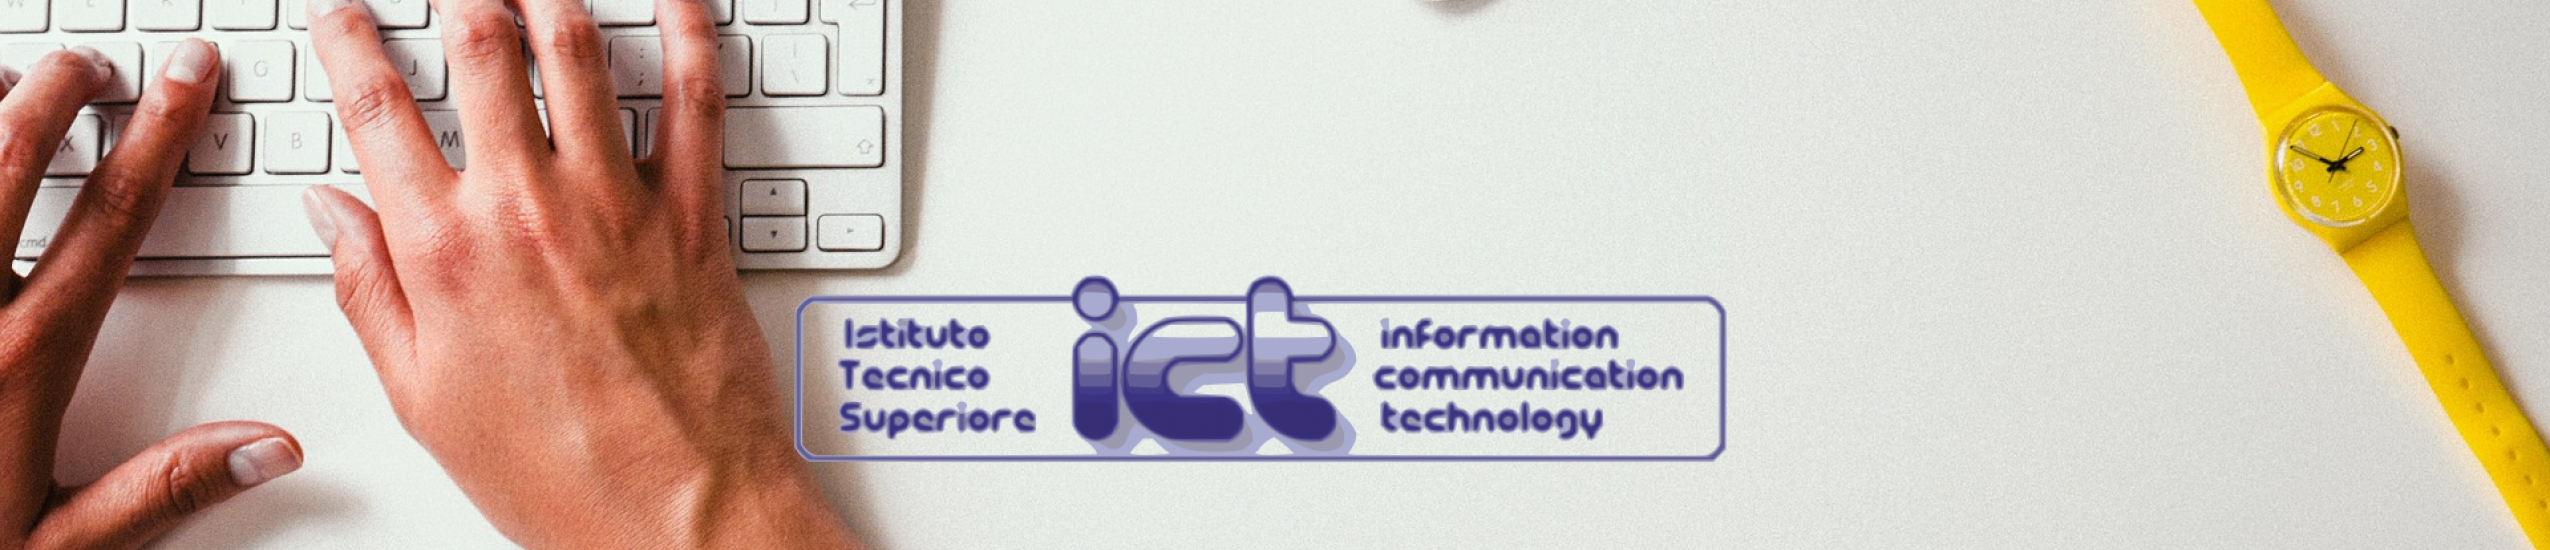 Accademia Digitale ITS - Information Communication Technology (ICT)